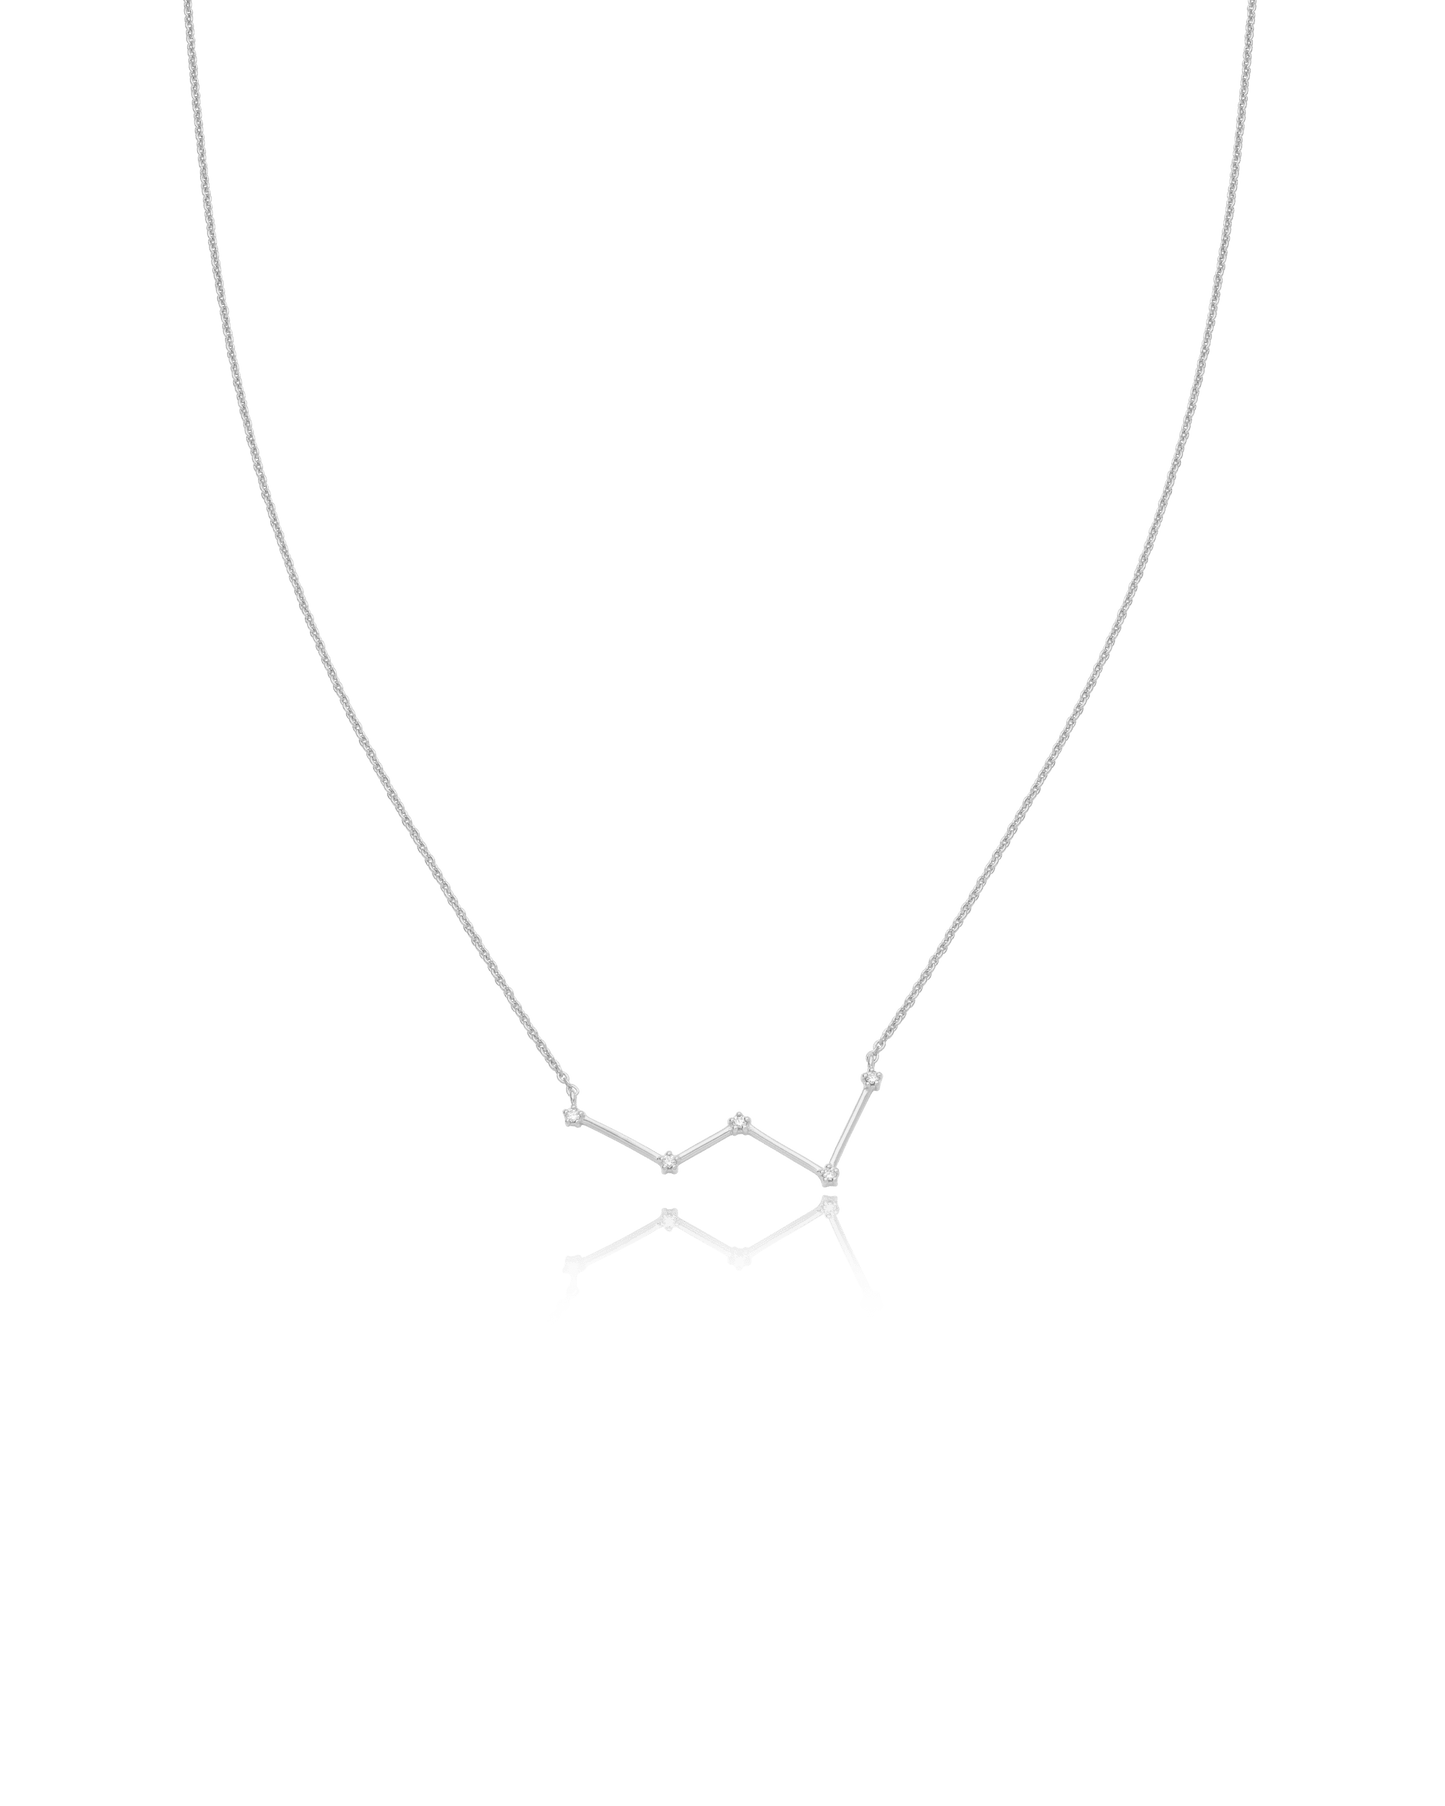 Ursa Major Constellation Necklace - 925 Sterling Silver Necklaces magal-dev Cassiopeia 16" 